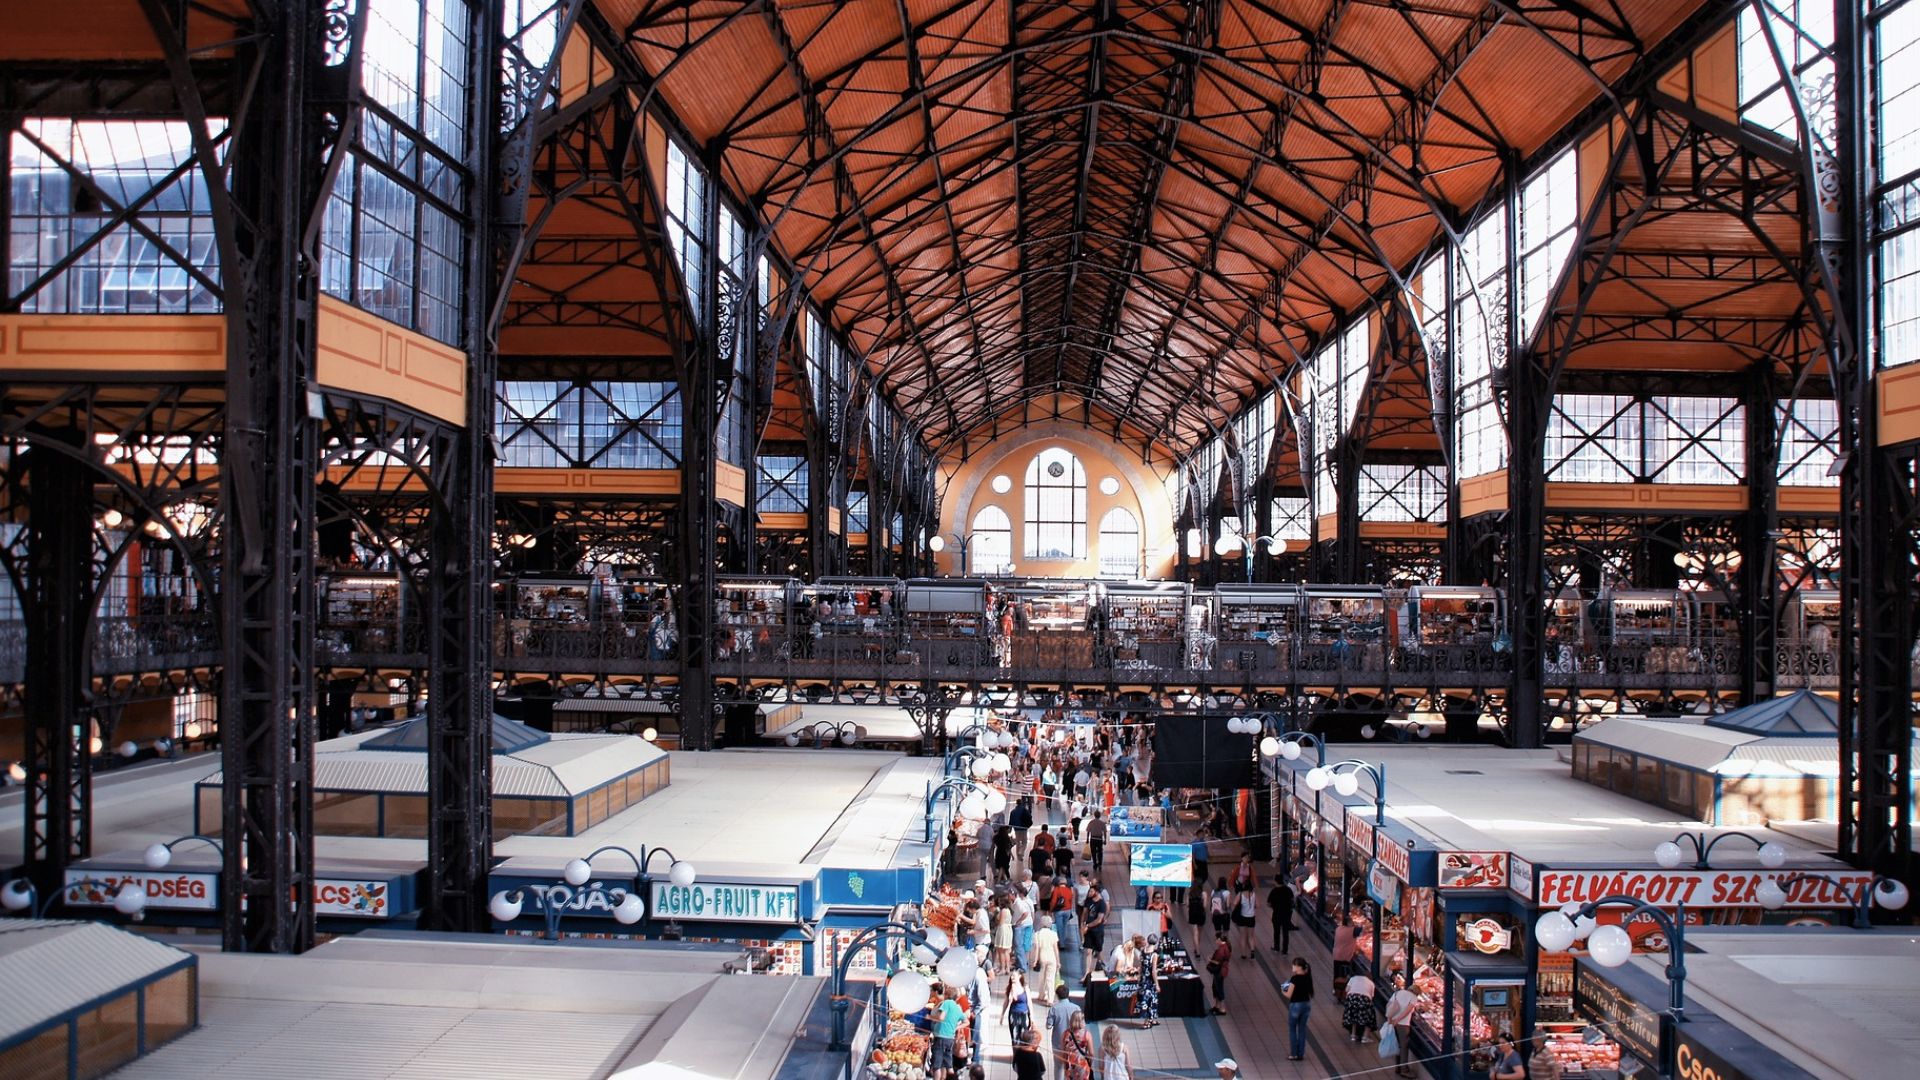 Inside the Great Market Hall, Budapest